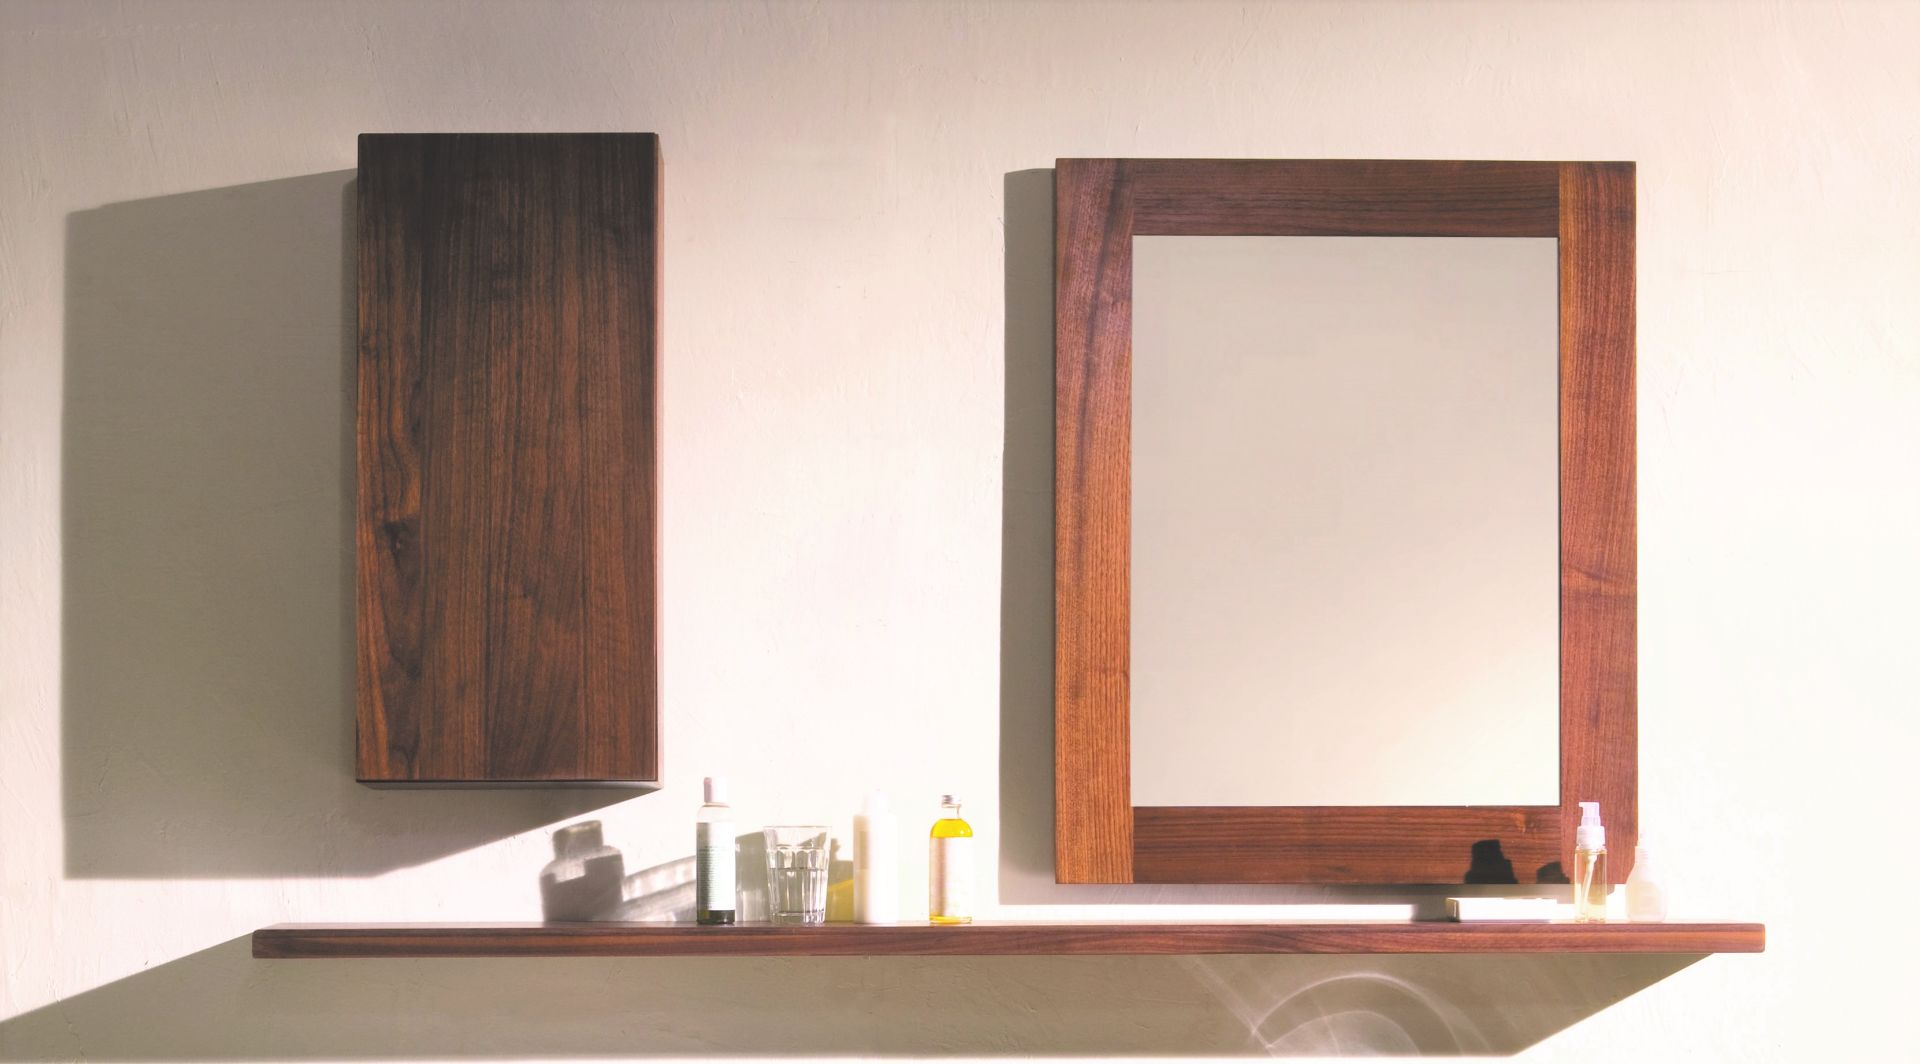 1 x Stonearth 300mm Wall Mounted Bathroom Storage Cabinet - American Solid Walnut - RRP £300 - Image 2 of 11